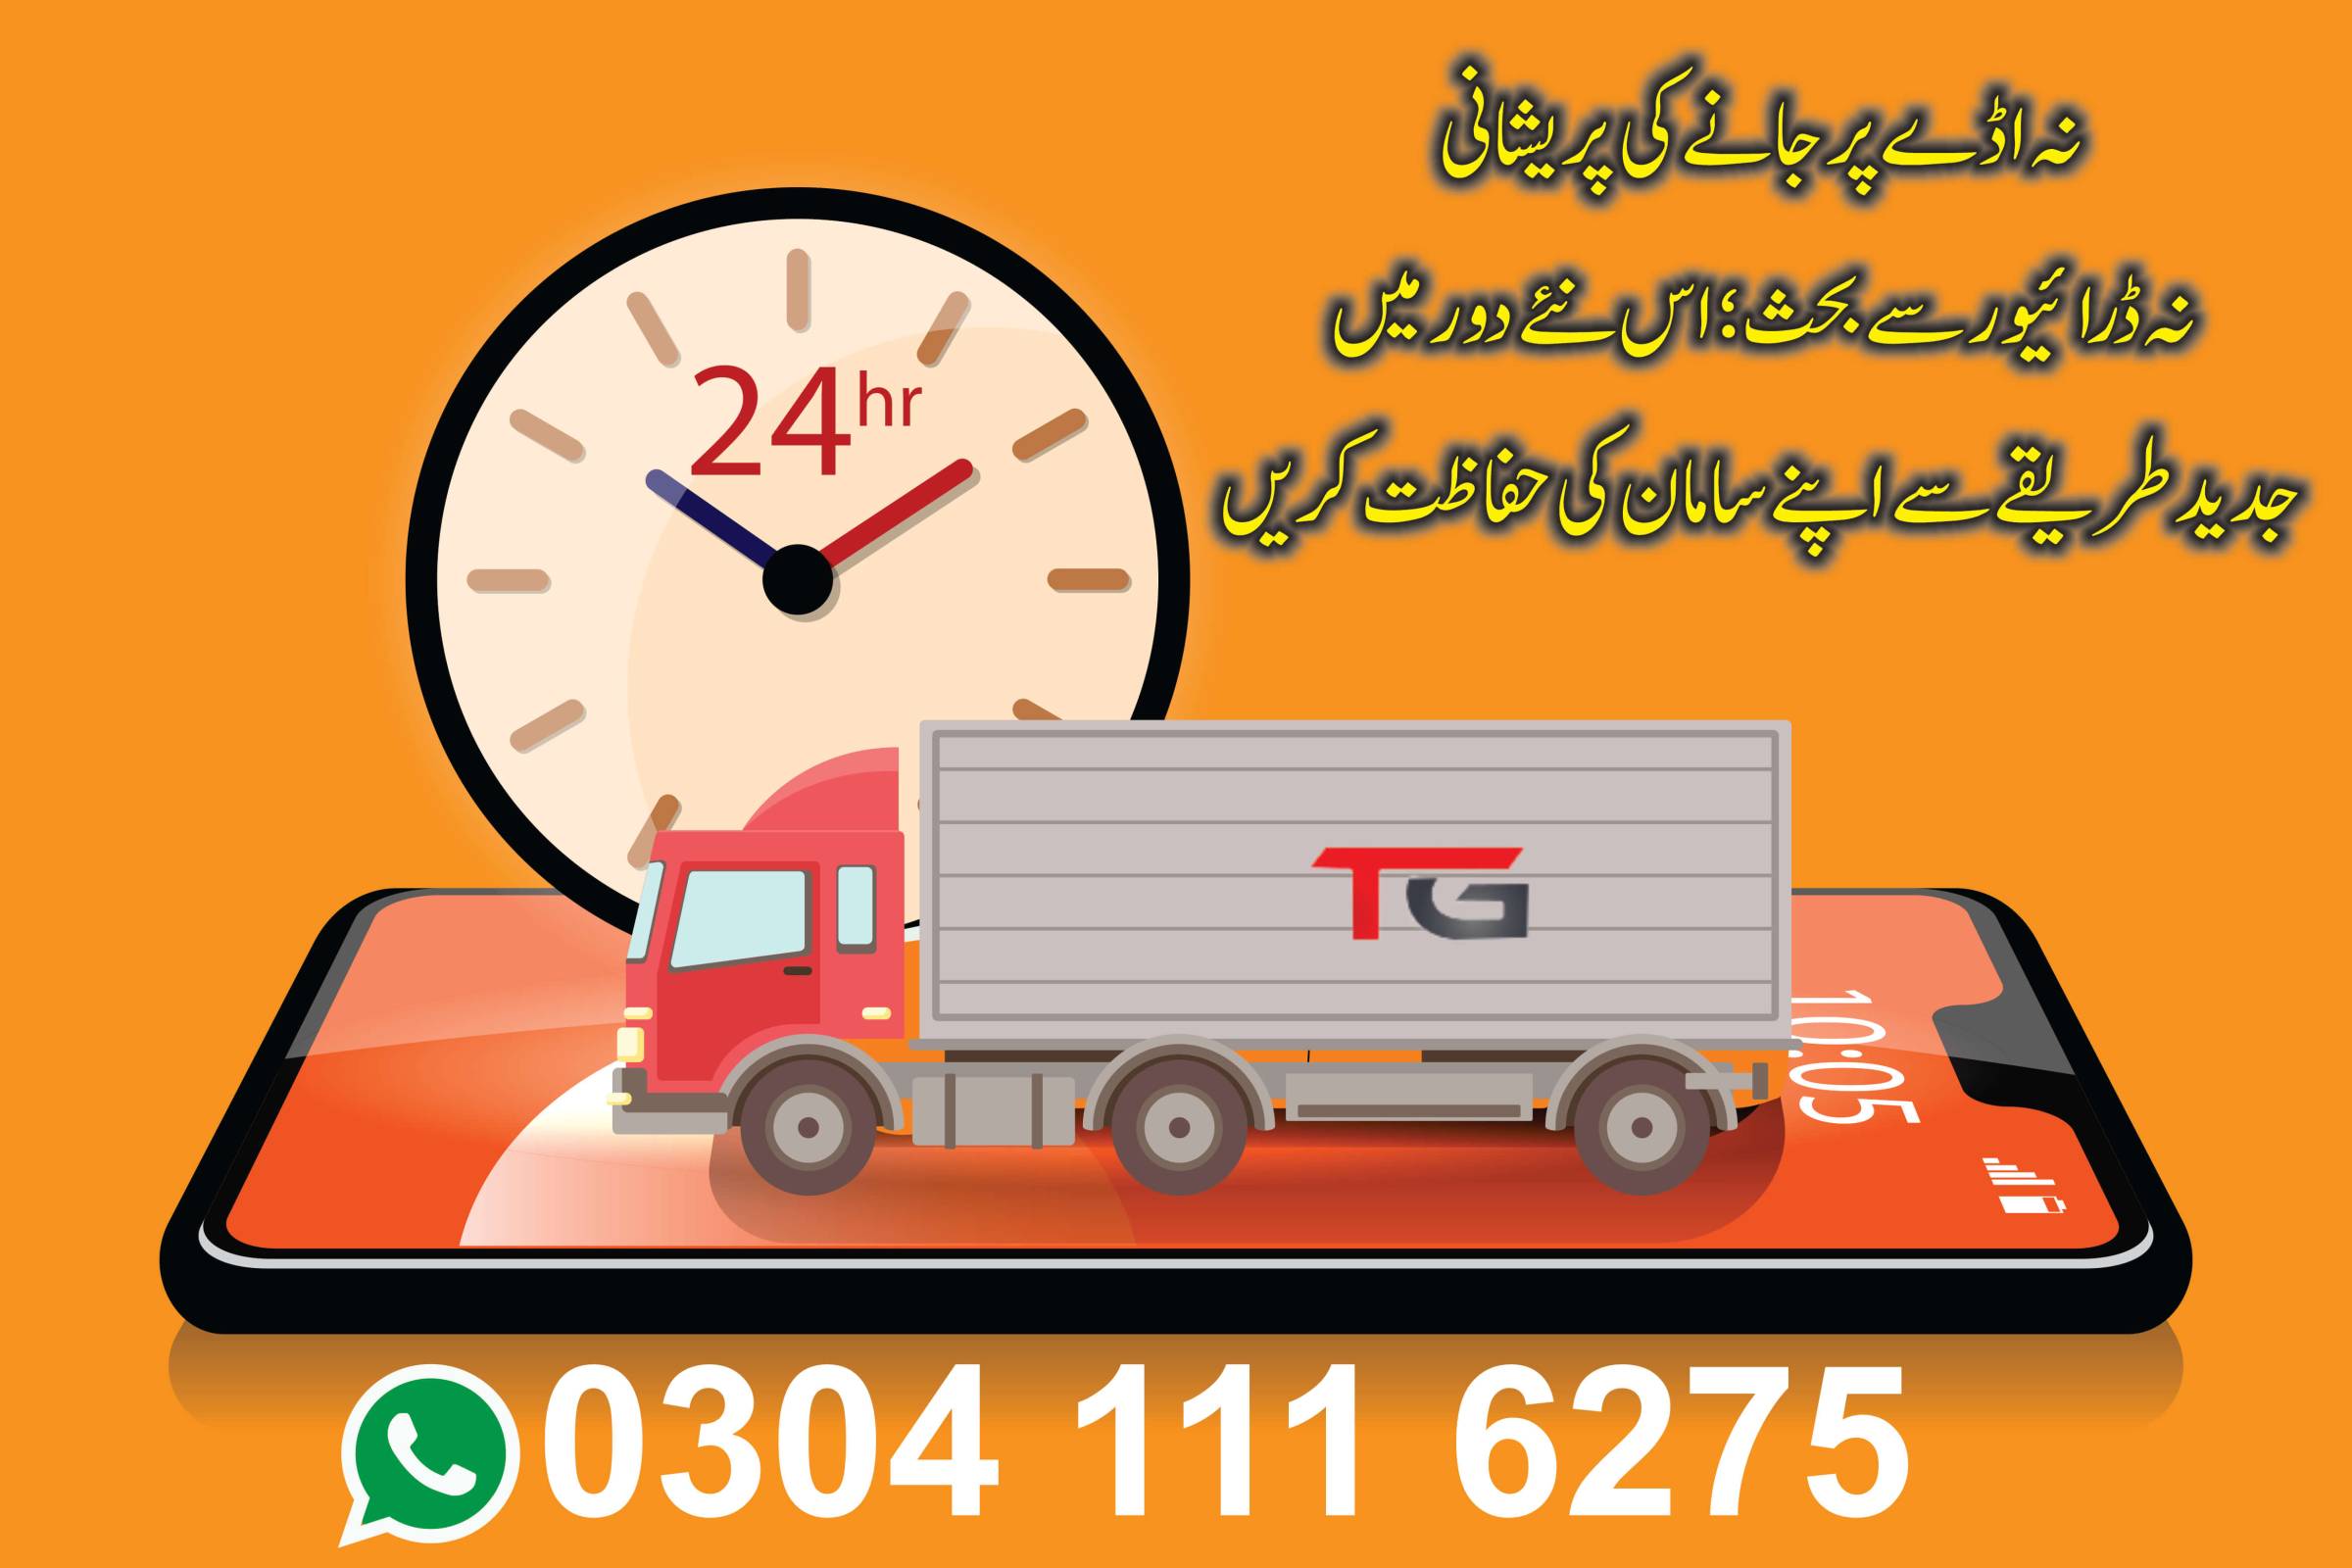 Best Packers And Movers In Pakistan - House Shifting Services - Luggage Moving Services